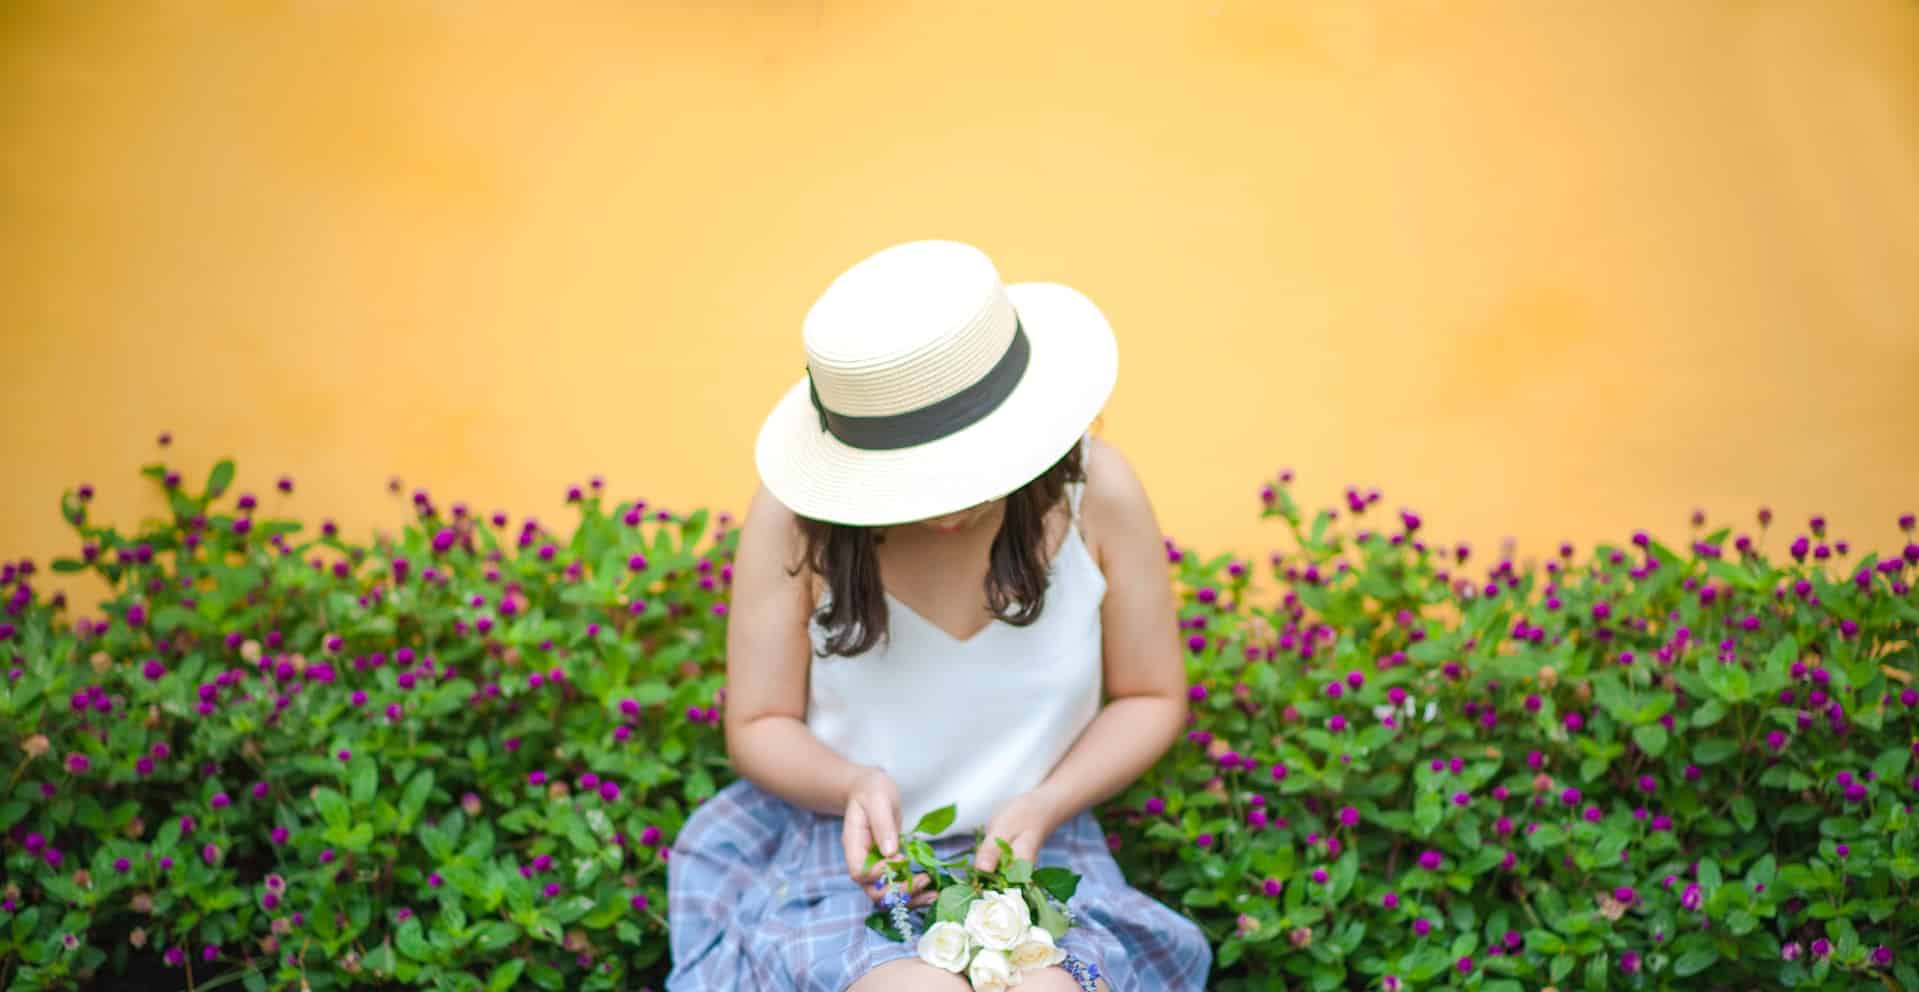 woman looking down with gardening hat on